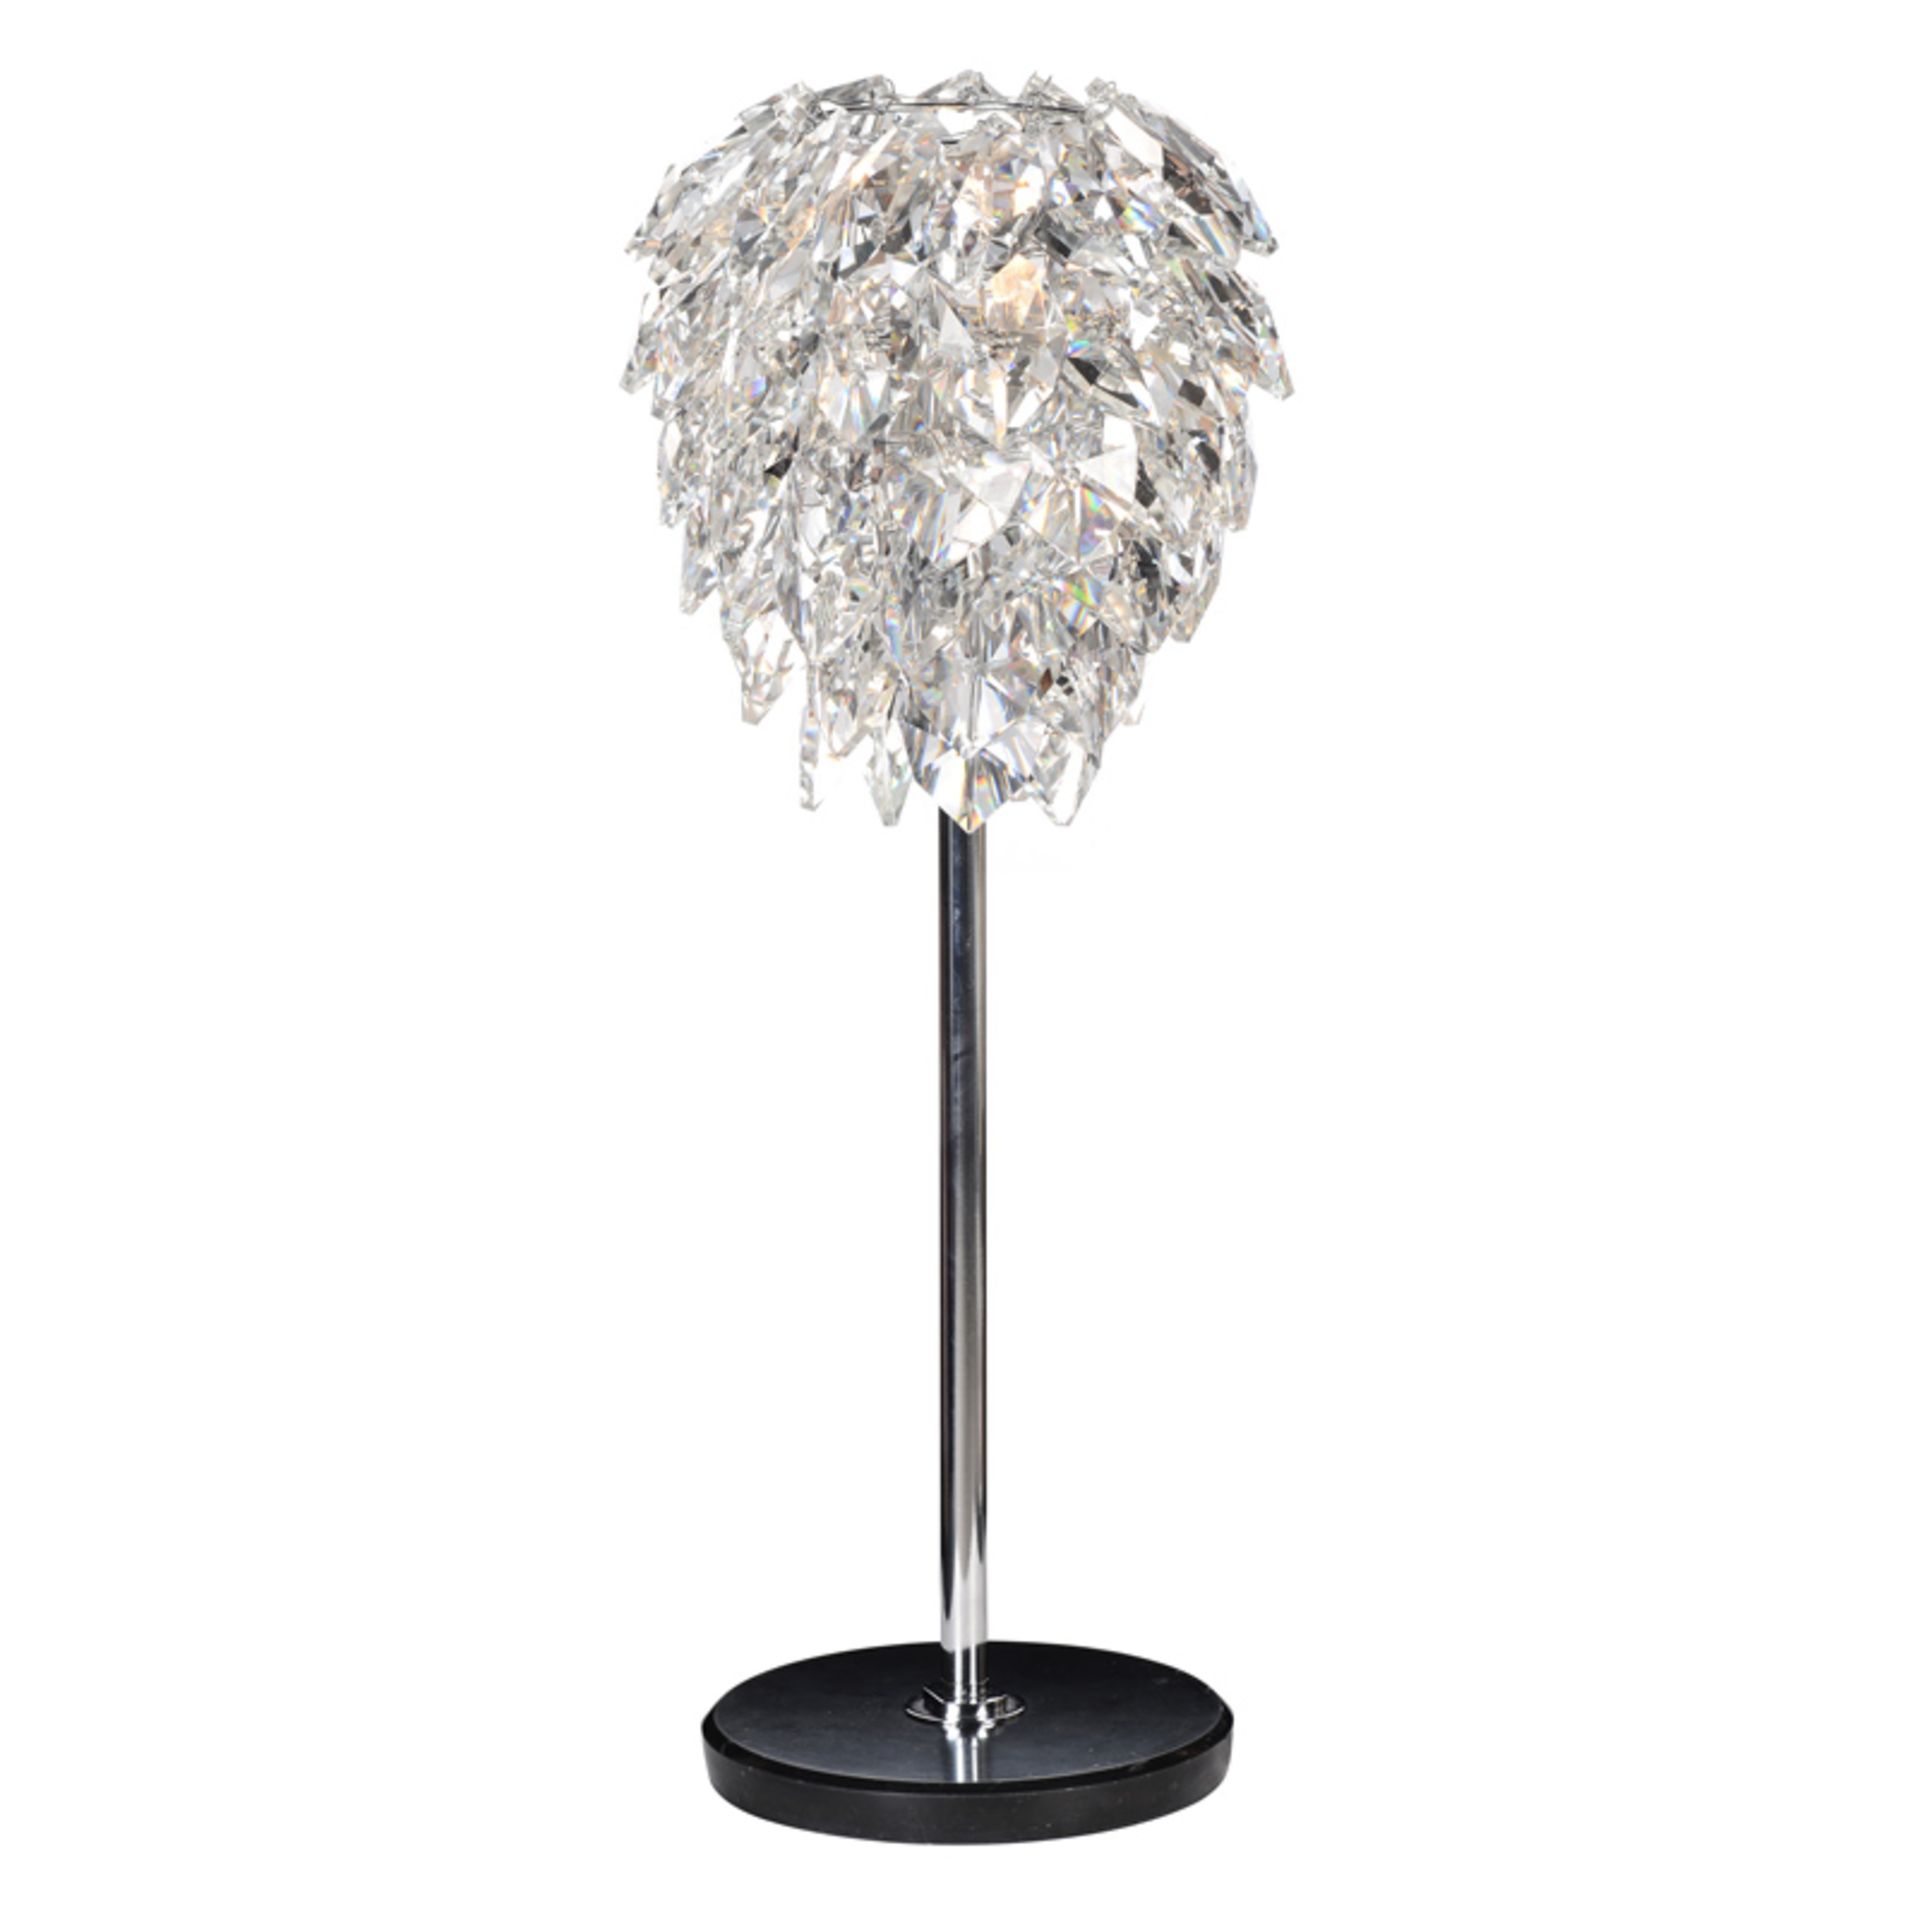 Pharaoh Petals Table Lamp (EU) Brilliant A Stunning Luminaire Petals Are Formed By Lenses That